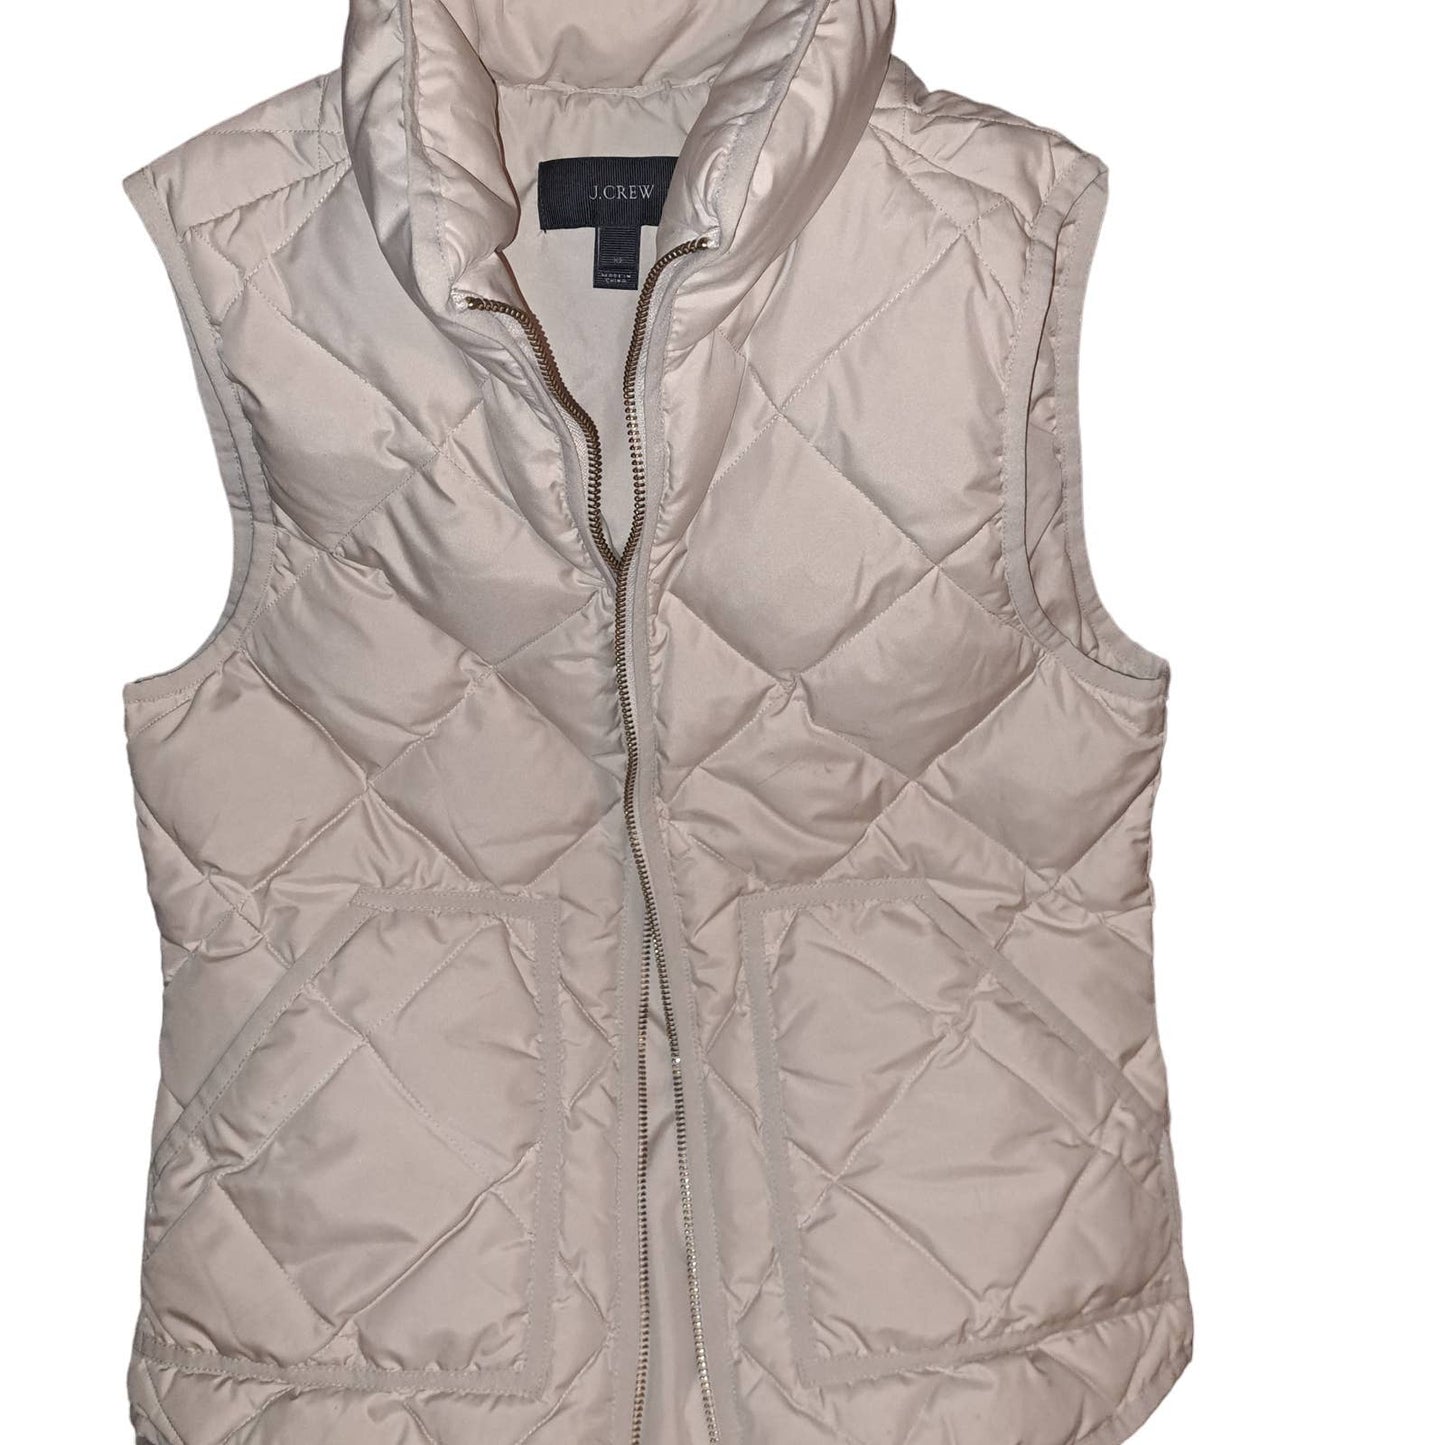 Worn ONCE - Beautiful Champagne J. CREW Puffer Zip Up Vest XS